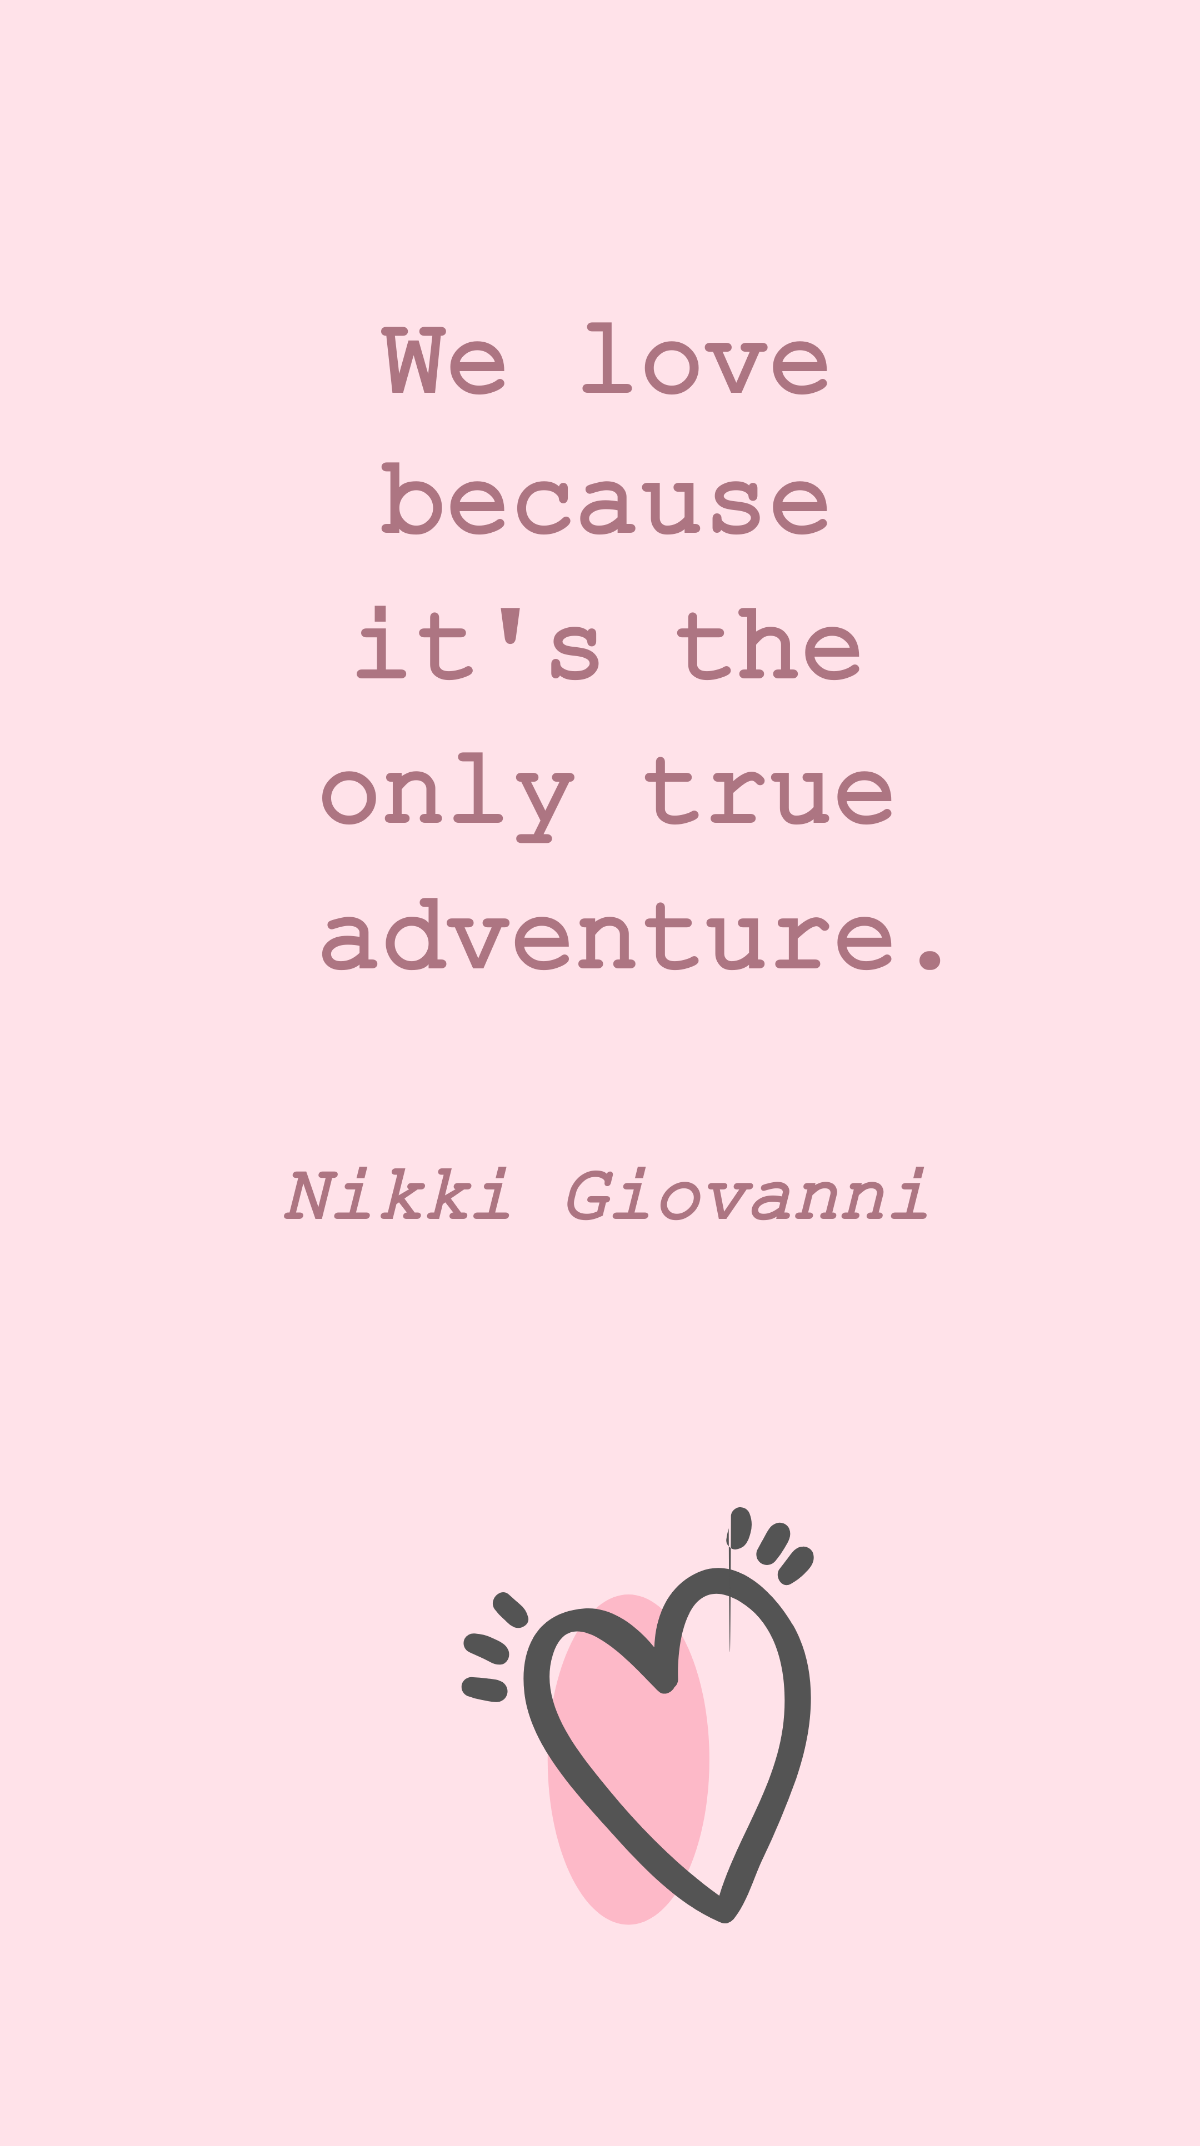 Nikki Giovanni - We love because it's the only true adventure.